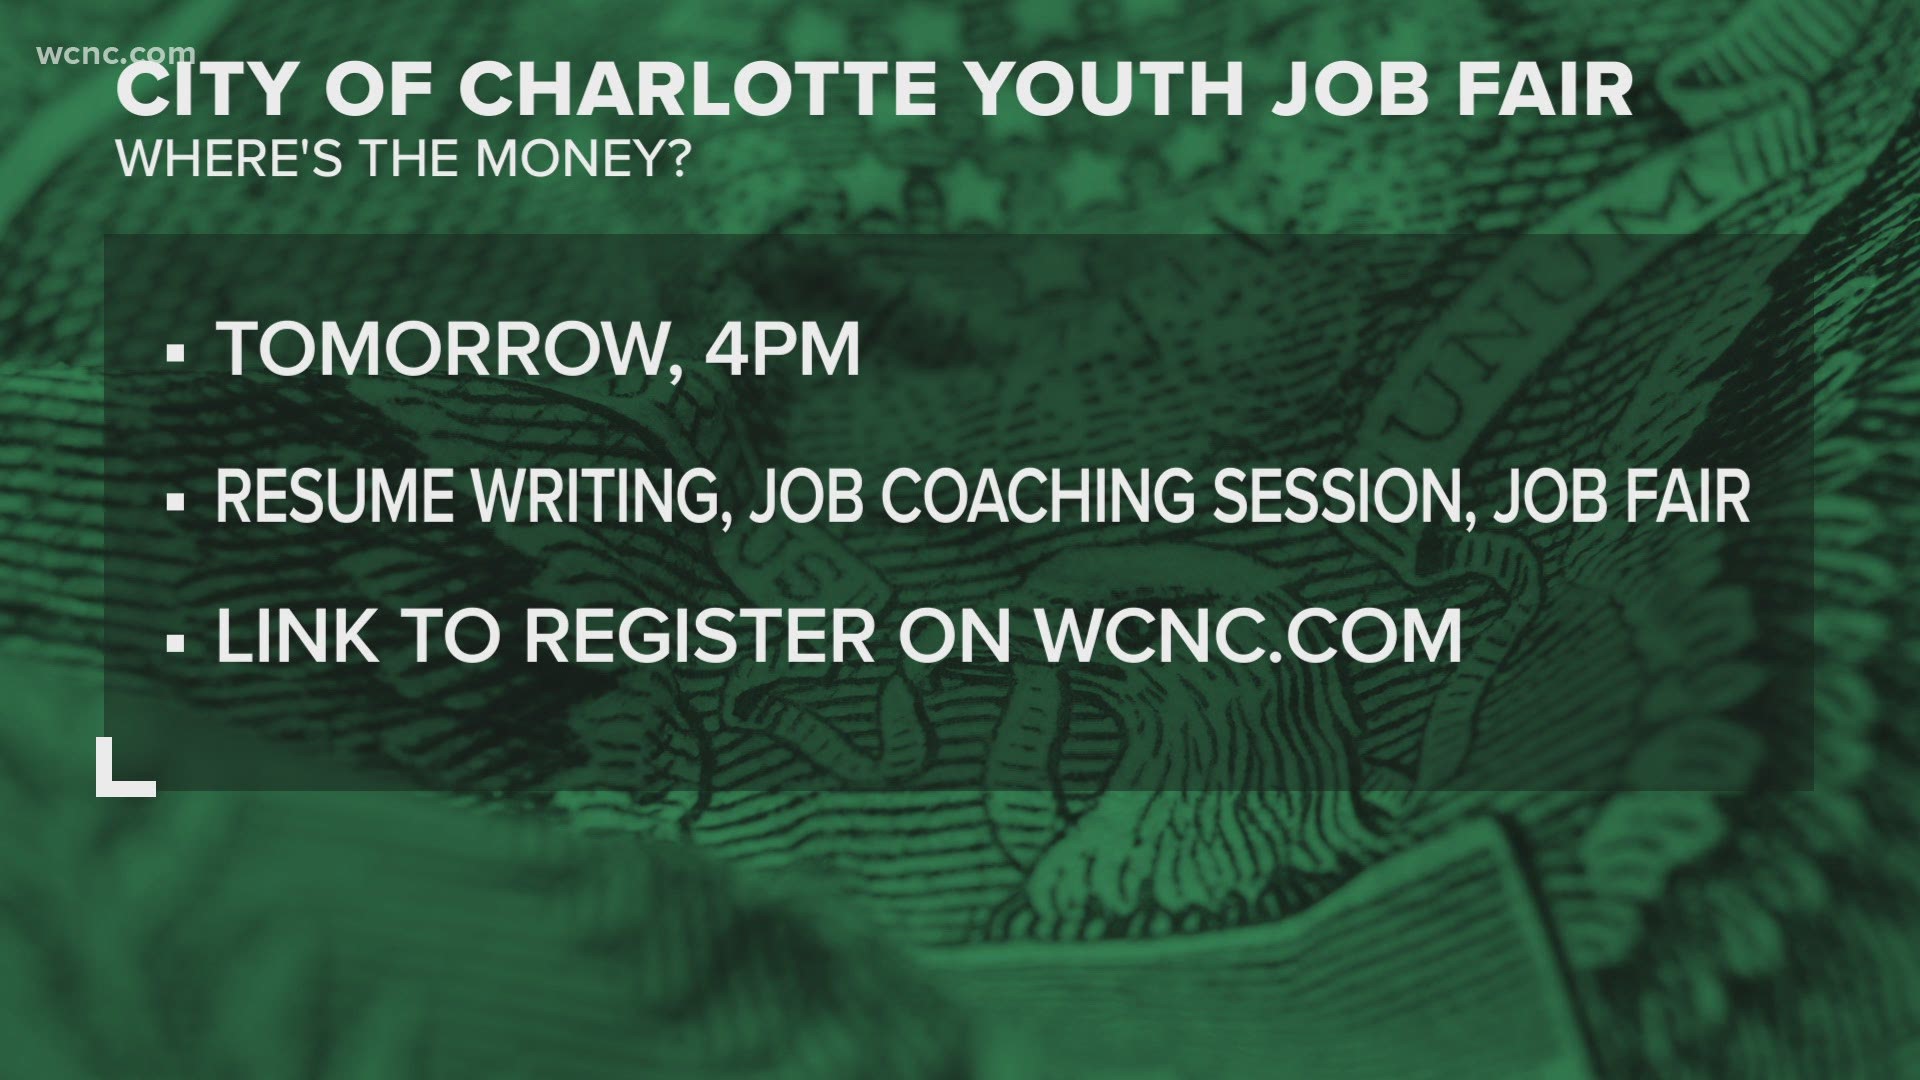 Is your teenager looking for a summer job? The City of Charlotte is hosting a virtual youth job fair on Wednesday.